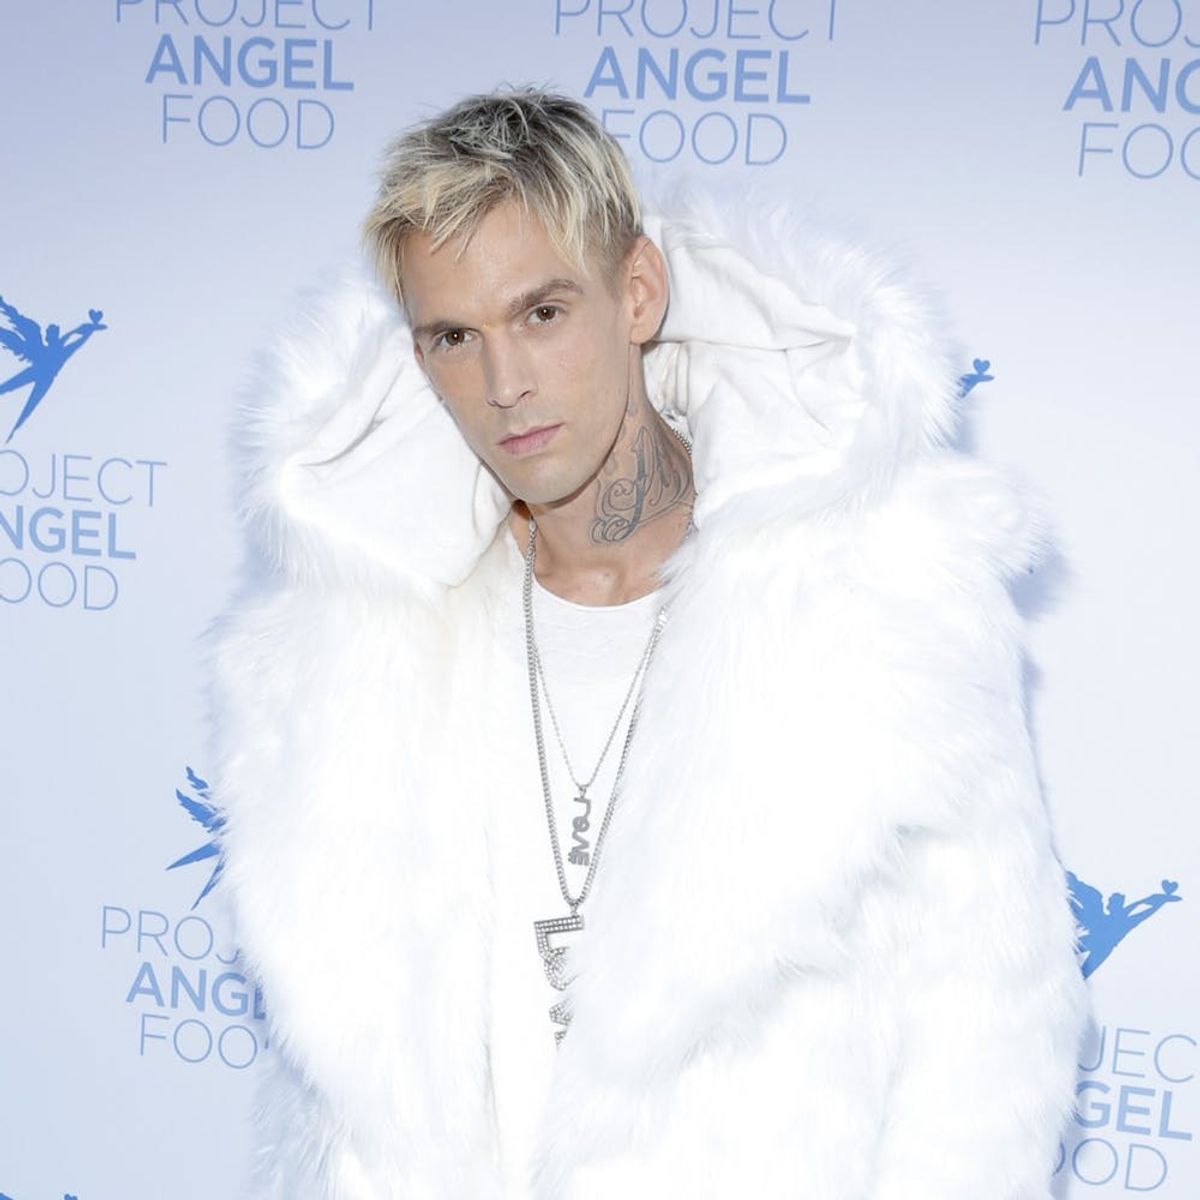 Aaron Carter Reveals Details on the Scary Car Wreck That Left Him With a Broken Nose